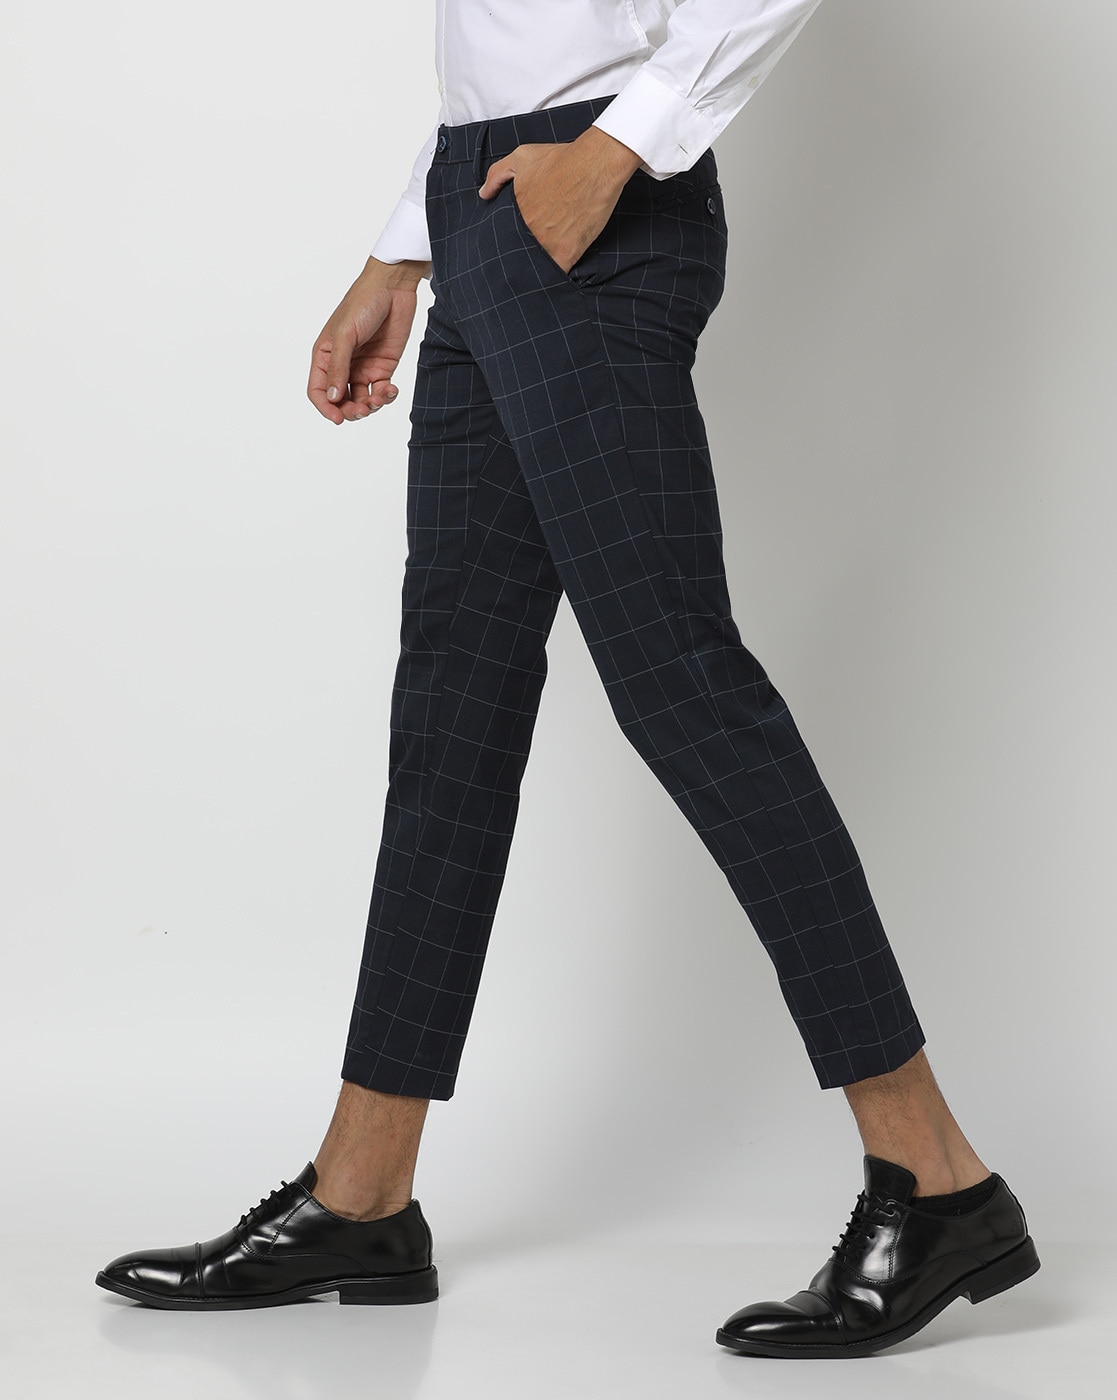 Shetland Tweed Wool Trousers - Plaid - Blue with Navy, Red & Green (P613) -  Men's Clothing, Traditional Natural shouldered clothing, preppy apparel